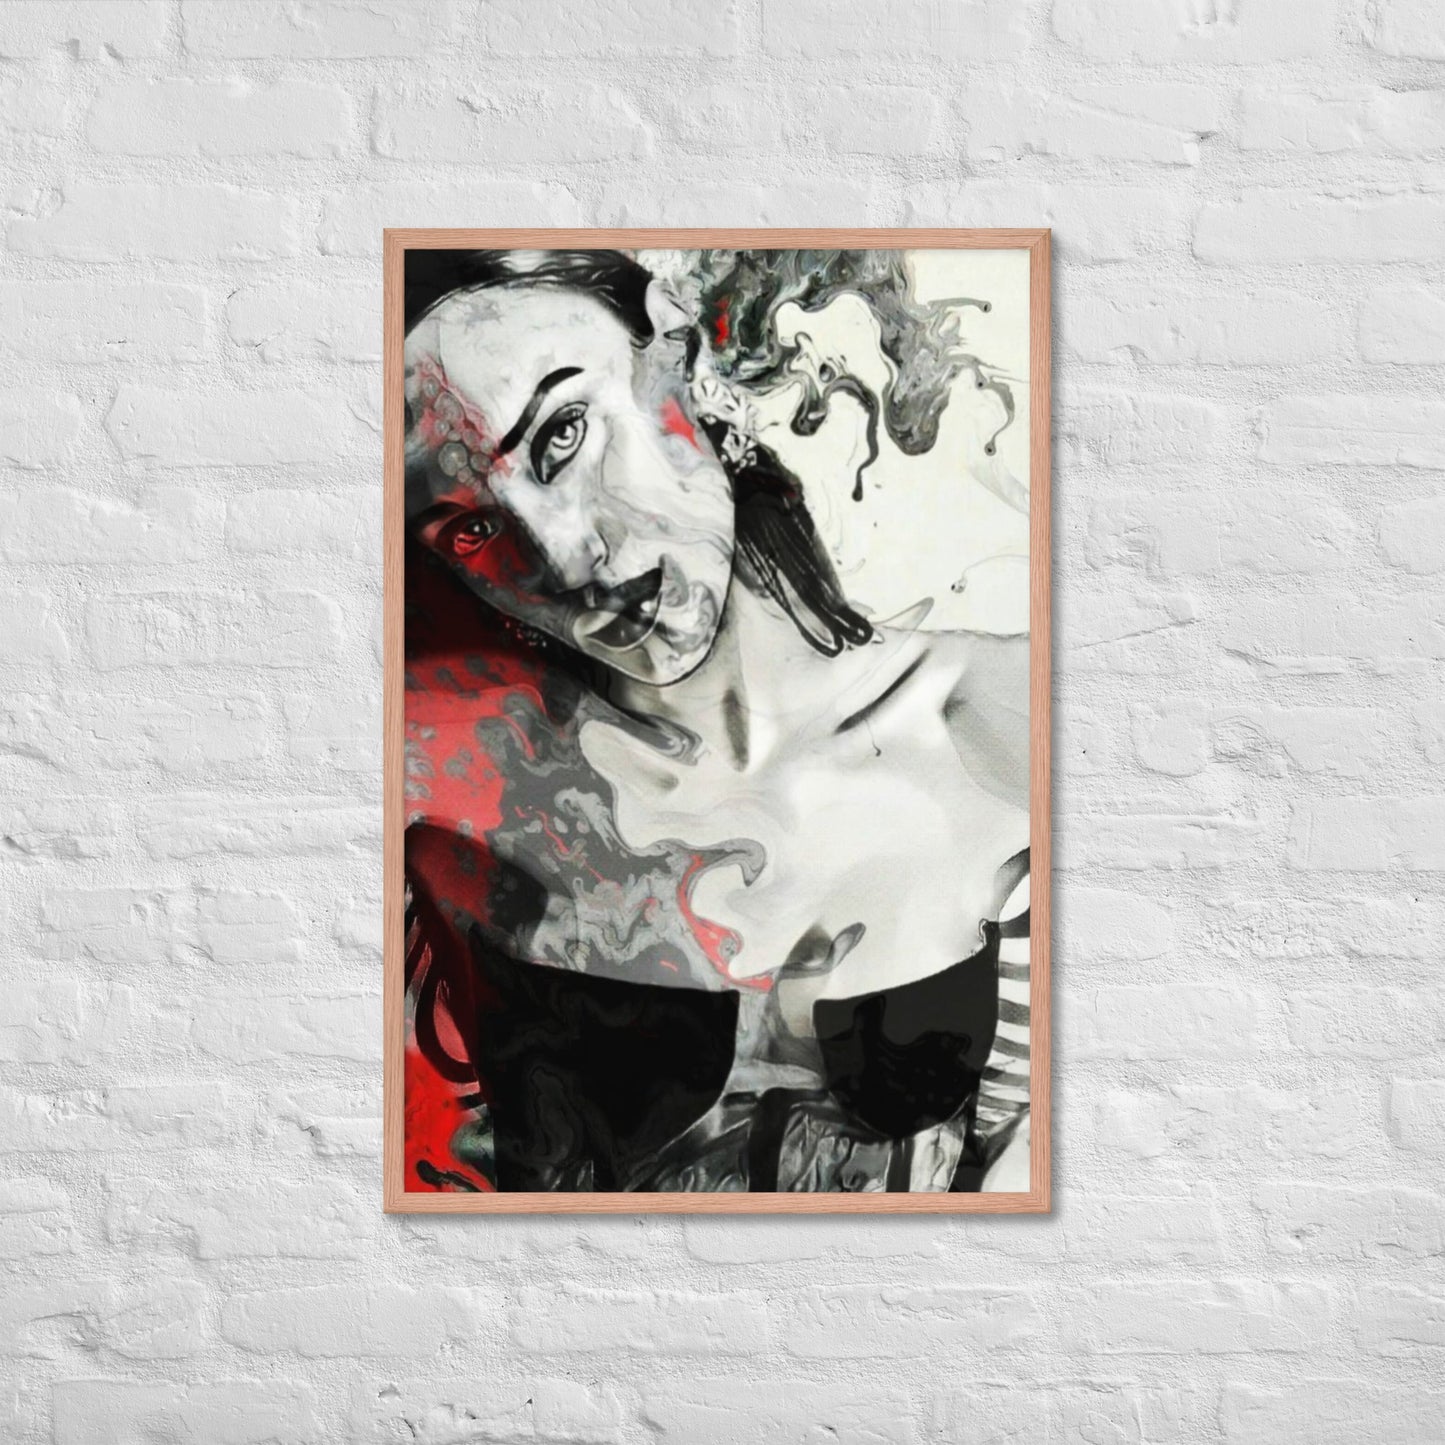 ABSTRACT WOMAN Wall Art Framed Poster - BONOTEE